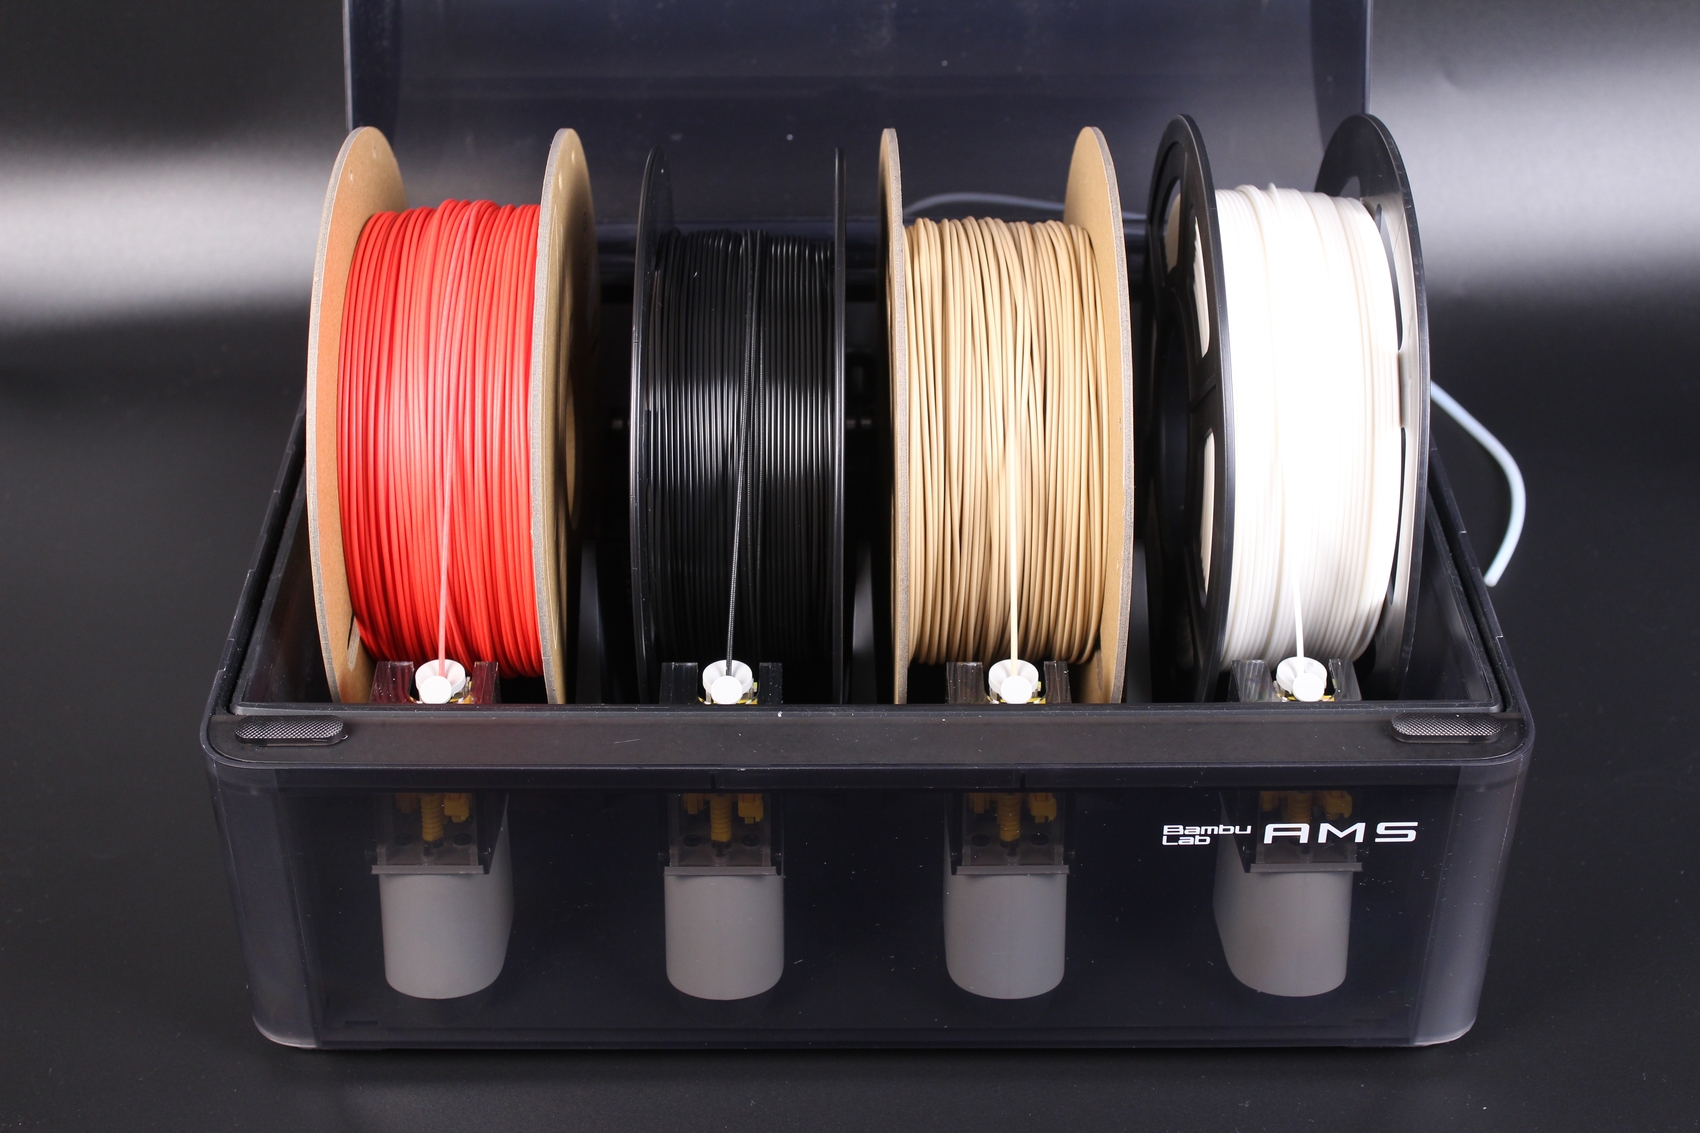 Bambu Lab AMS with four spools of filament | Bambu Lab X1 Carbon Review: Living in the Future